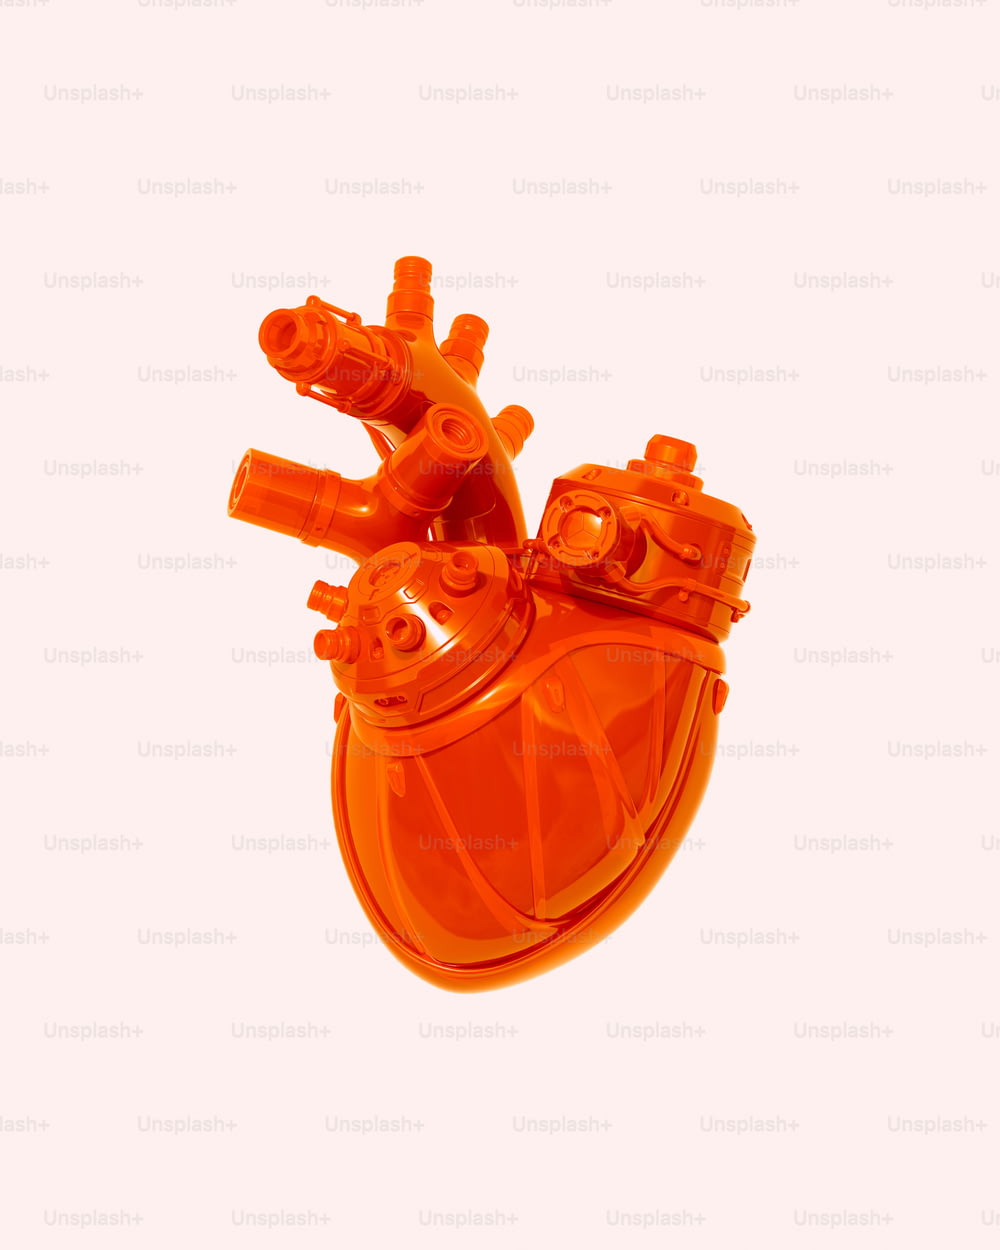 a close up of an orange heart shaped object